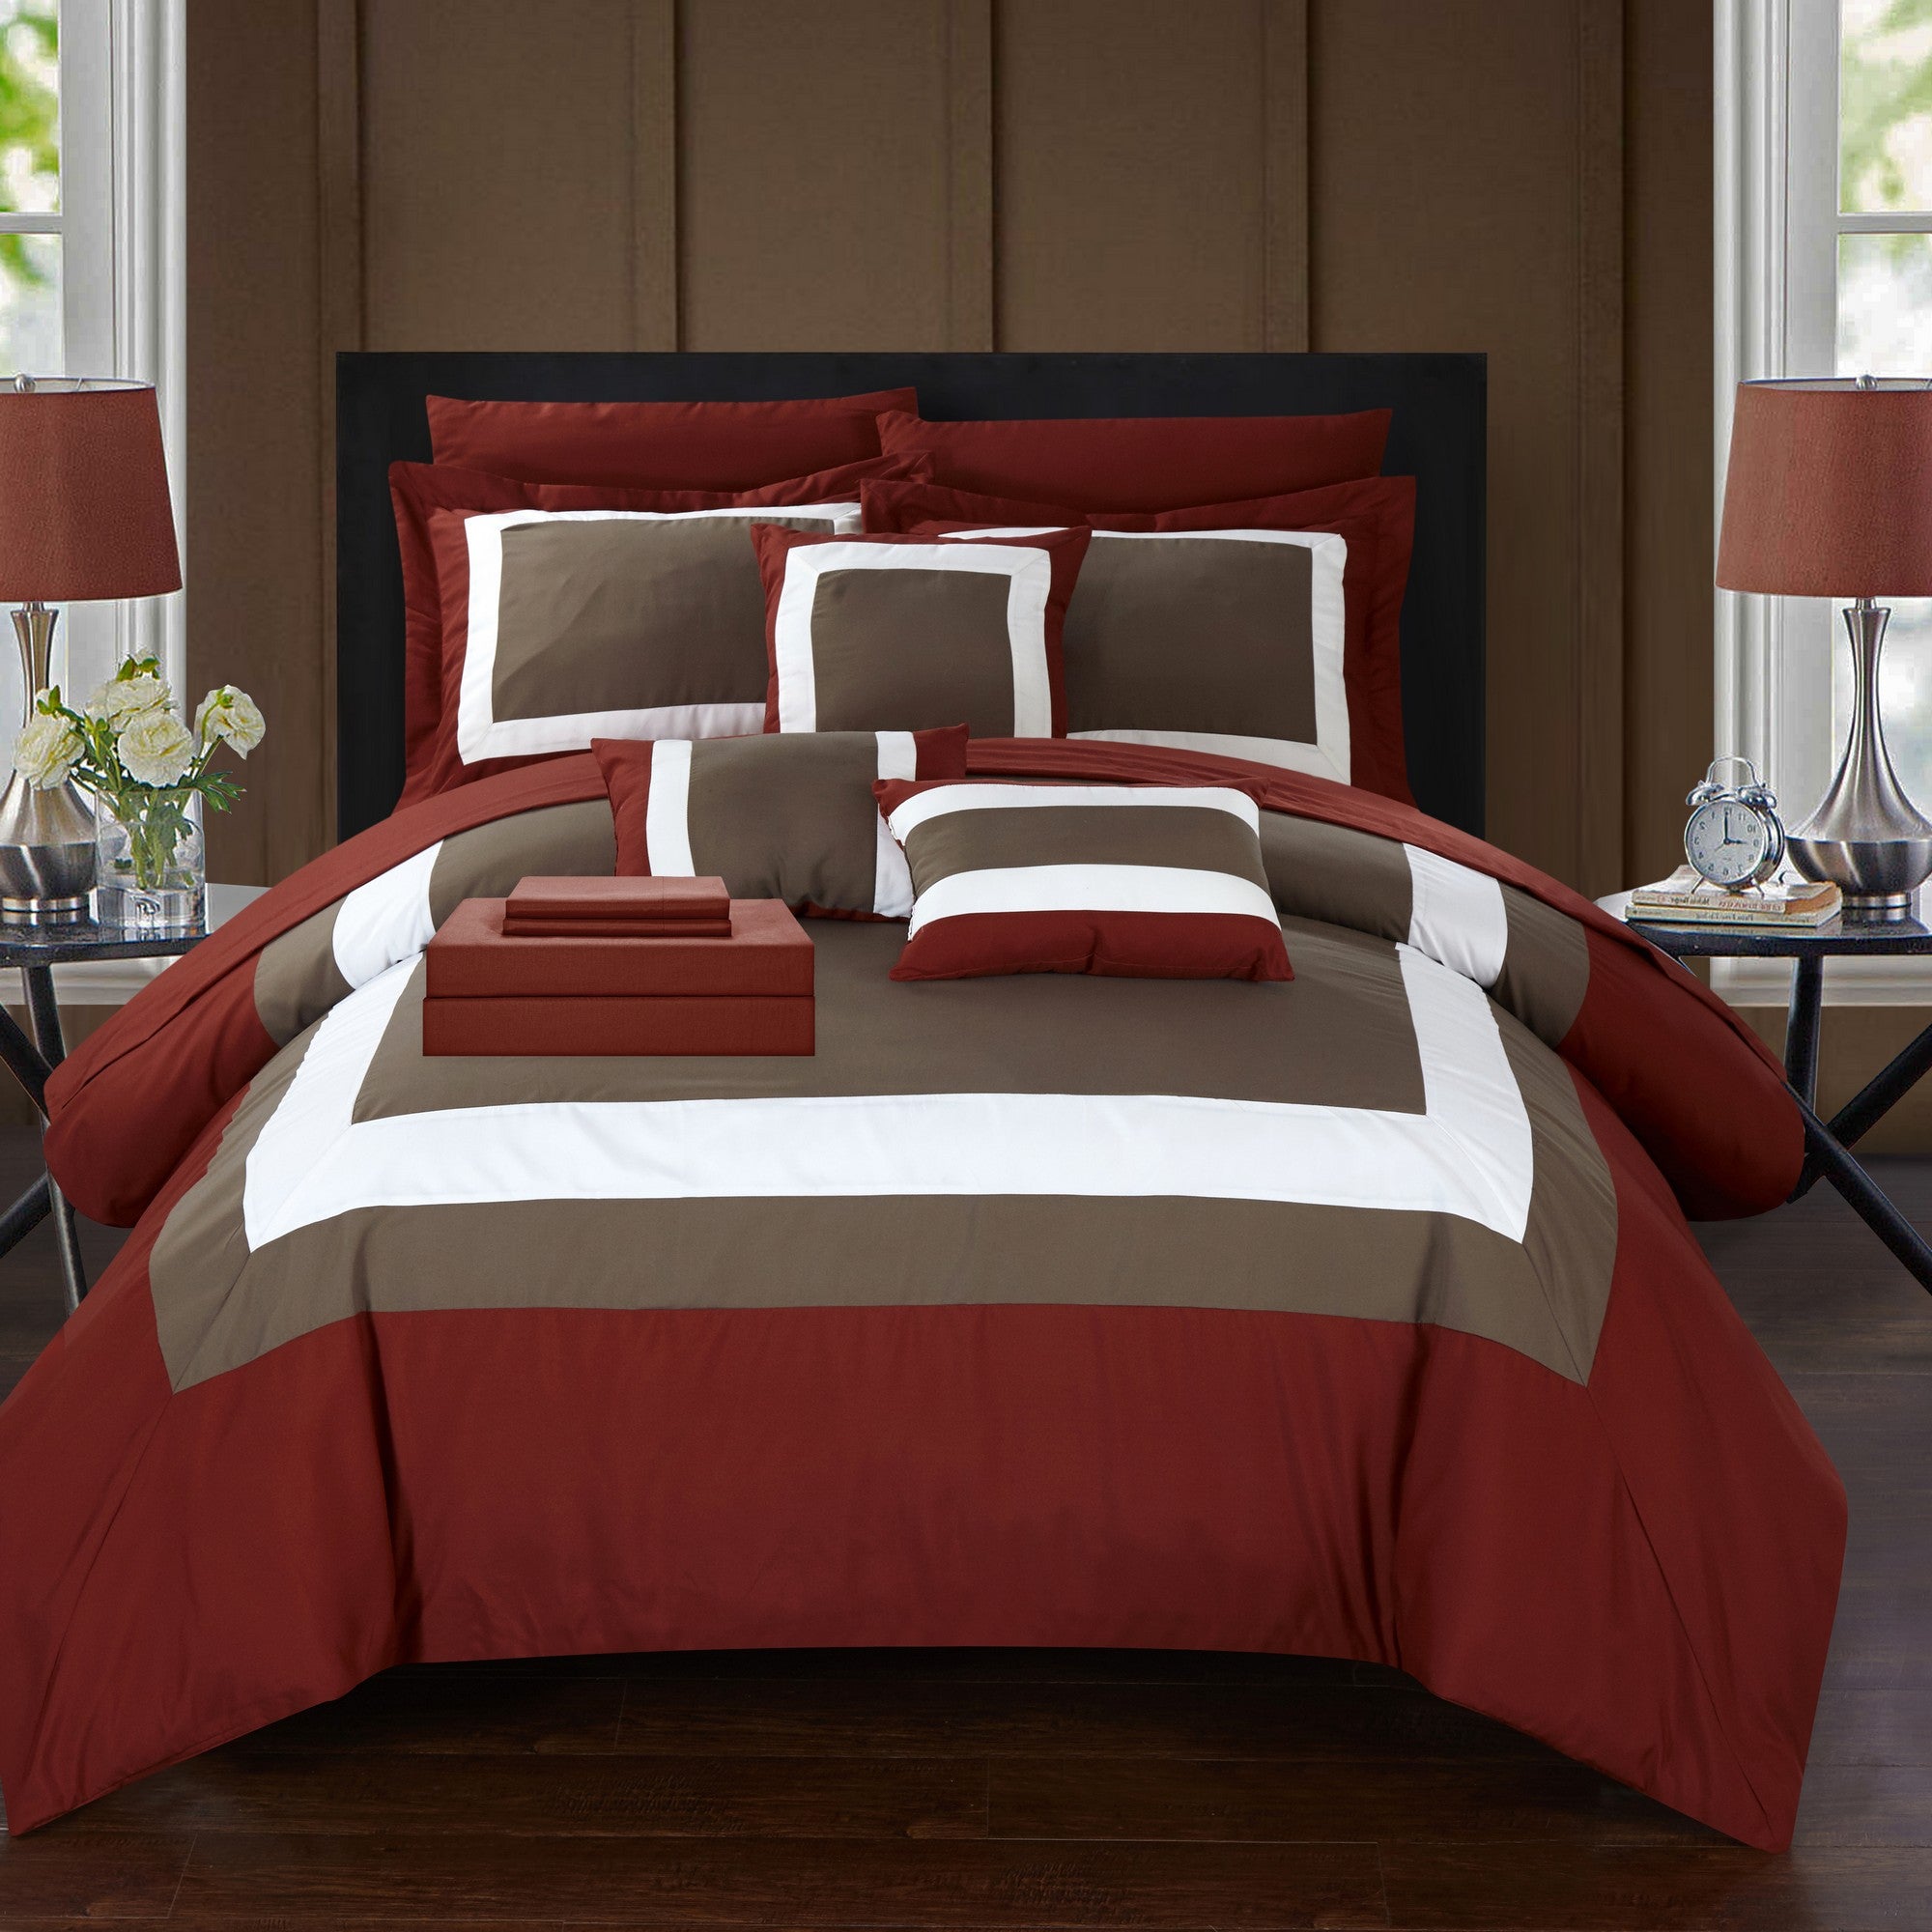 Chic Home Elegant Beaudine 10 Pieces Comforter Bed In A Bag Sheets Decorative Pillows & Shams Brick Red